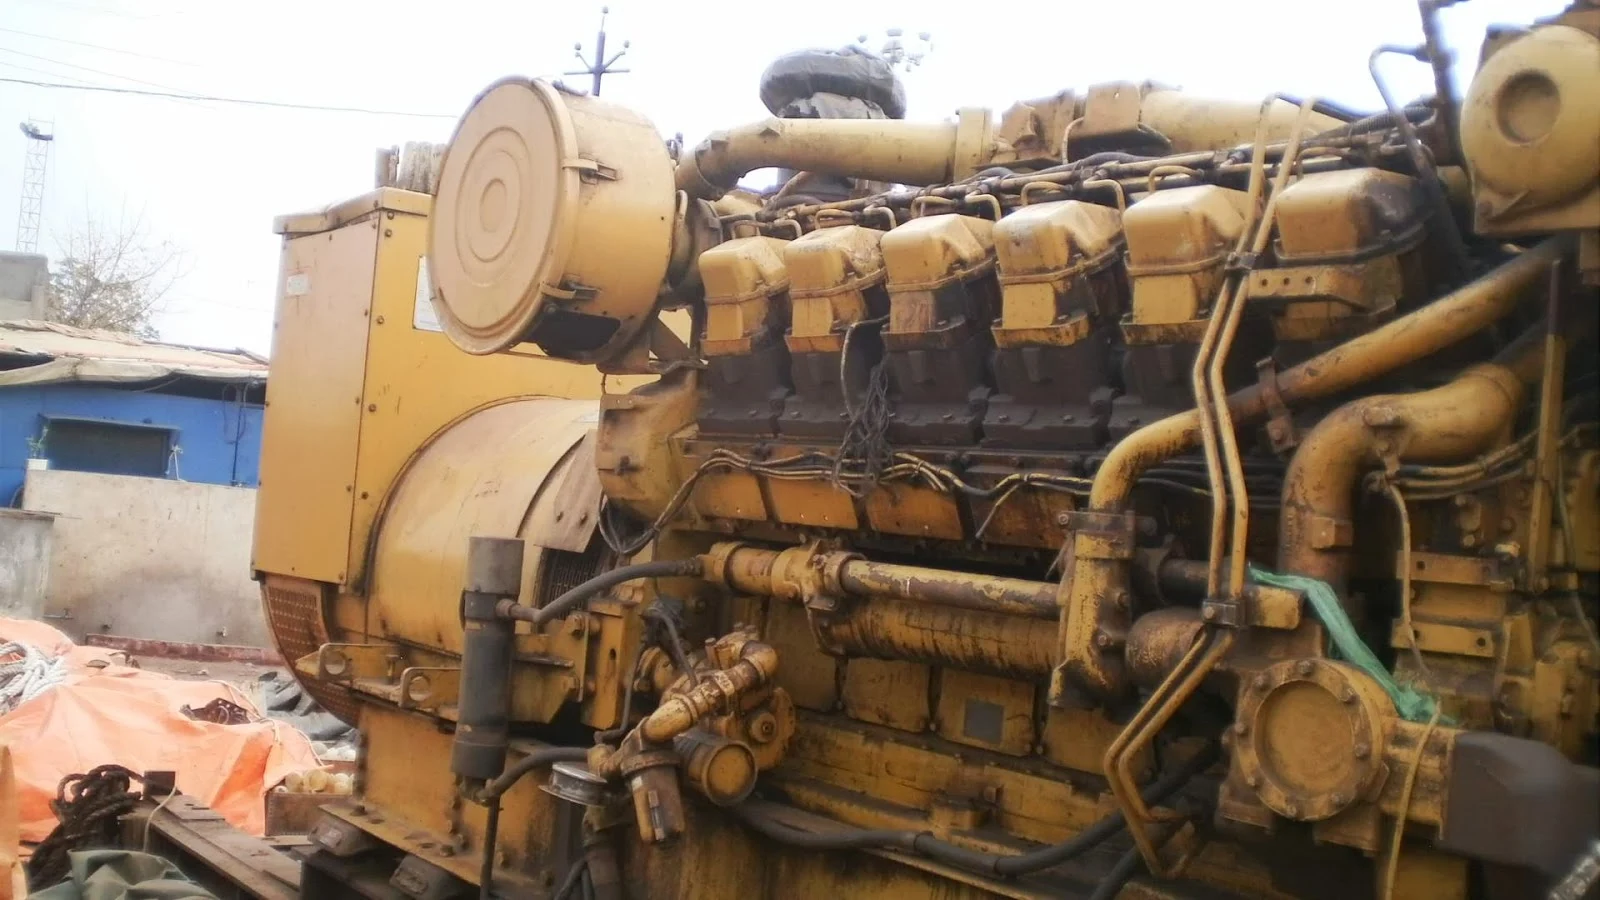 CAT 3512, Caterpillar Diesel Generator for Sale, Used, Second Hand, India, Alang, Low running hours, rebuilt, ready to dispatch